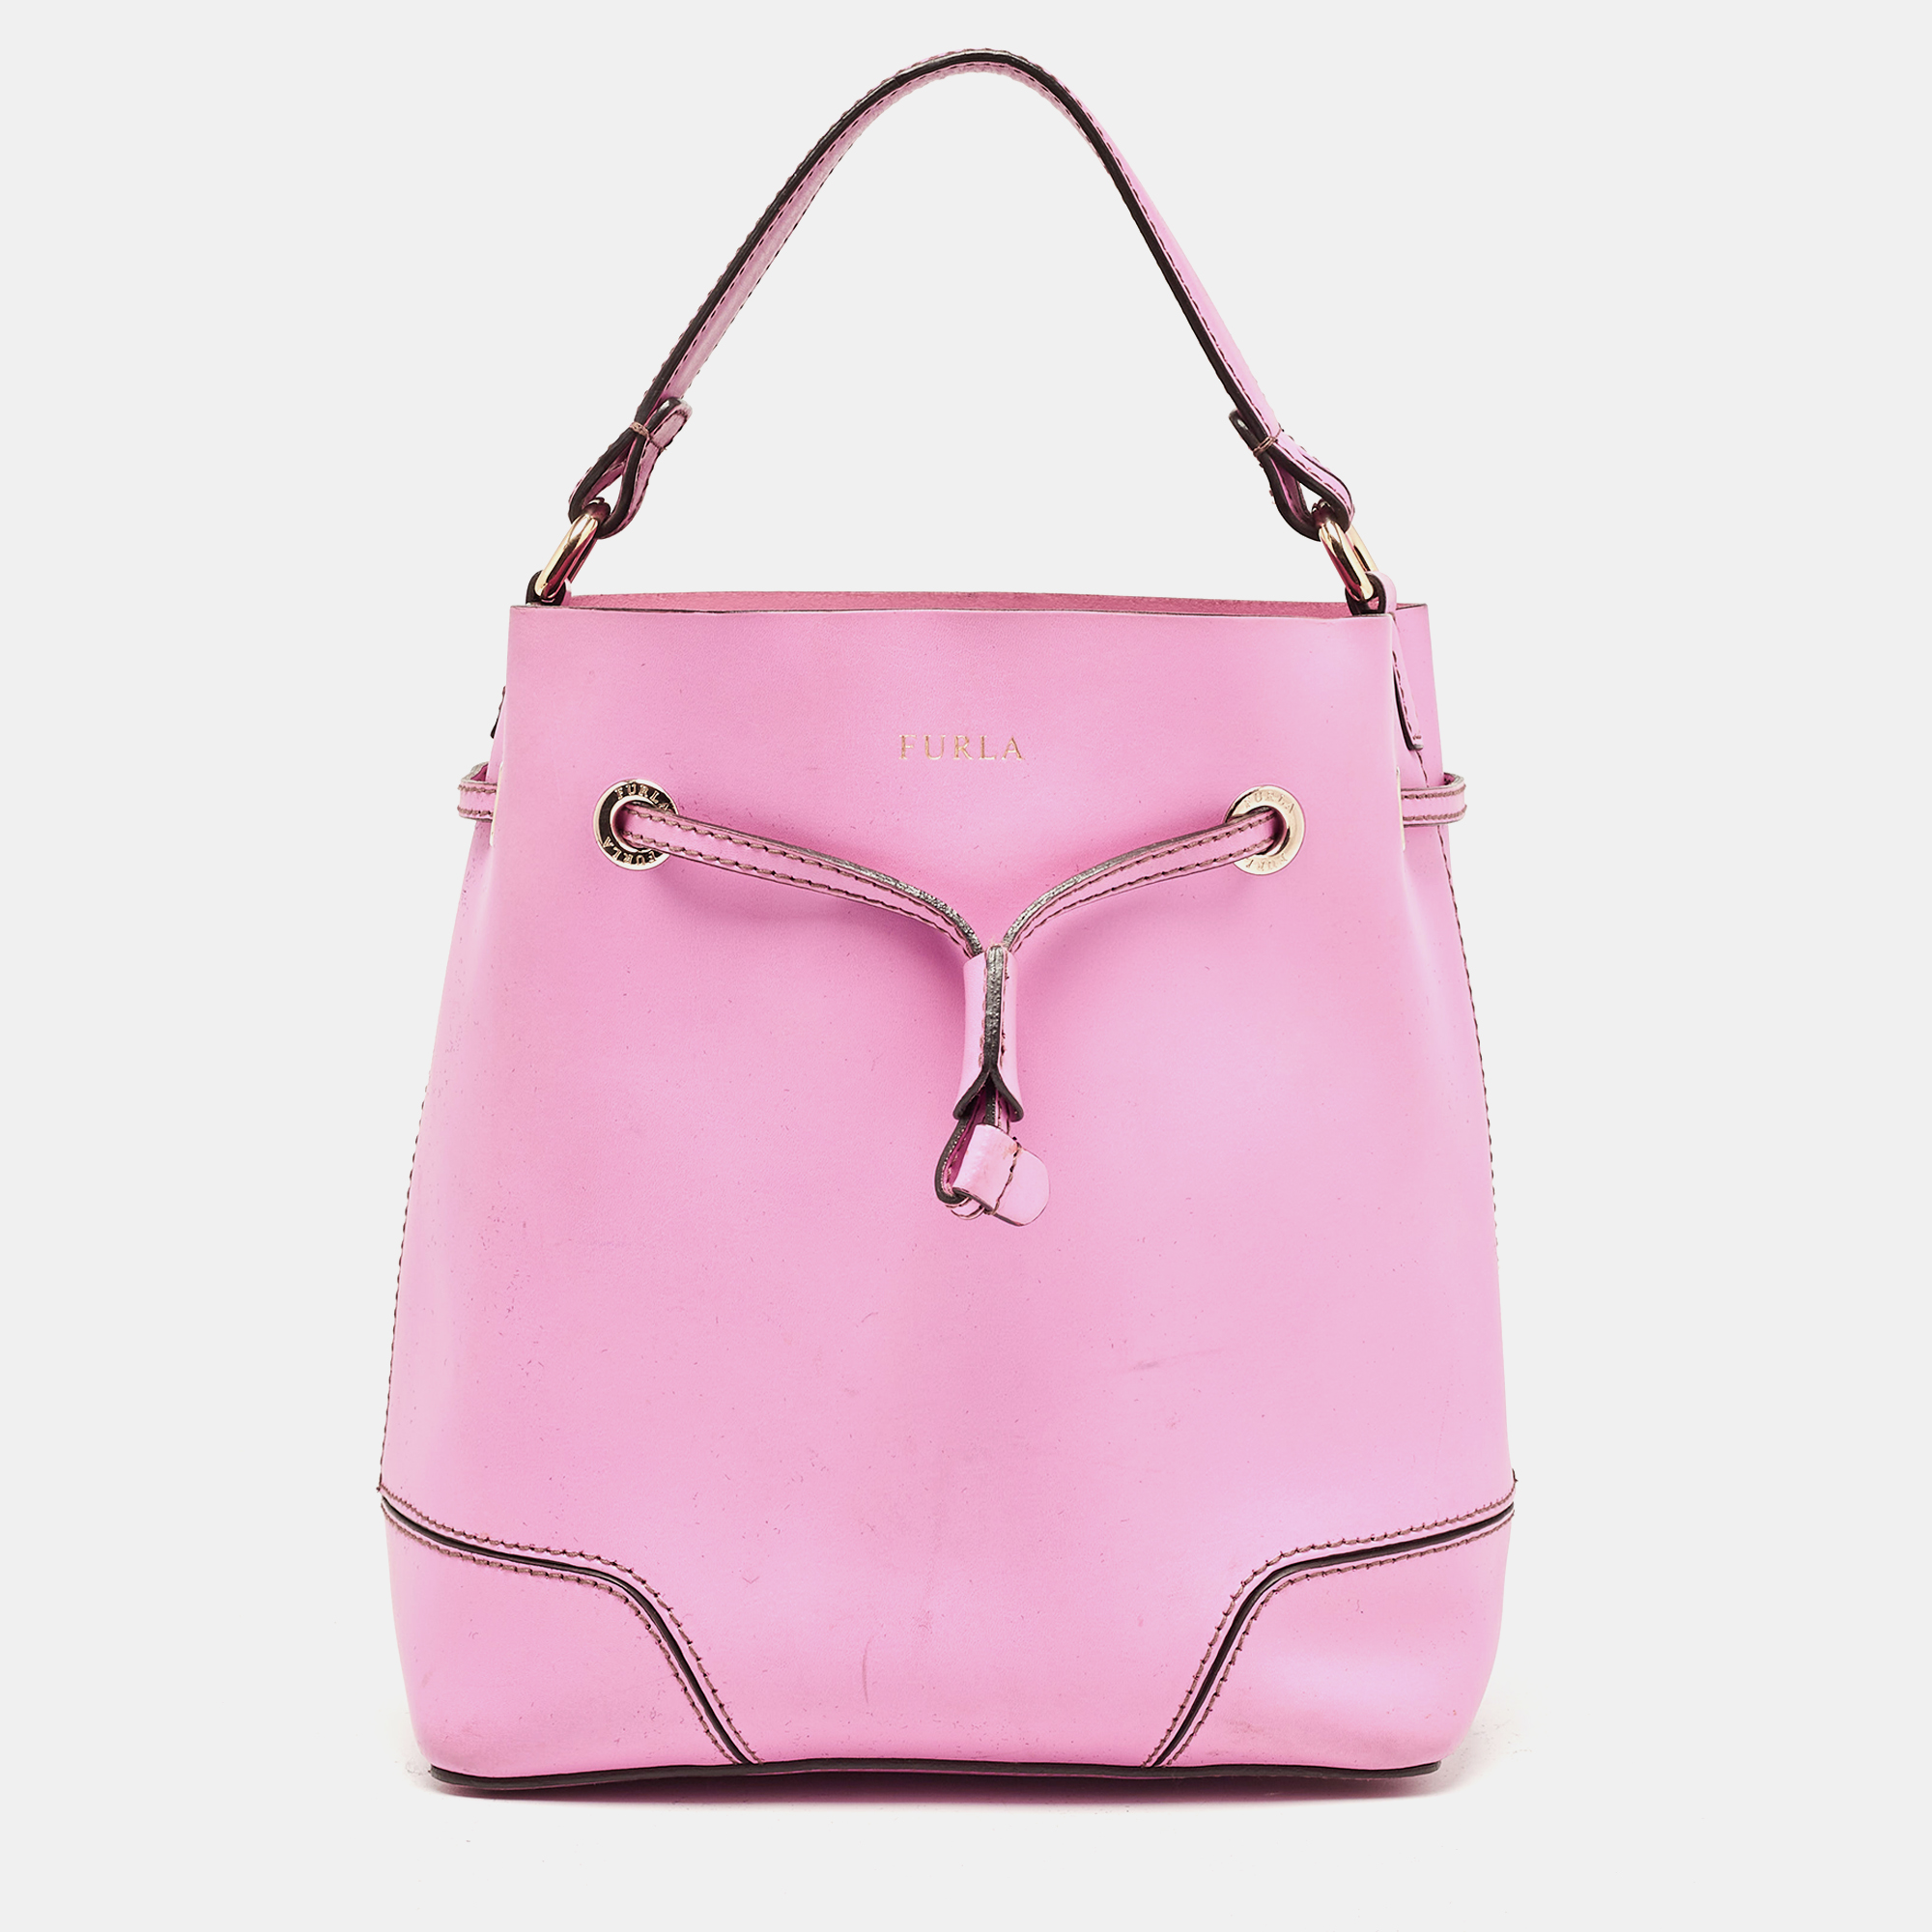 Pre-owned Furla Pink Leather Stacy Drawstring Bucket Bag